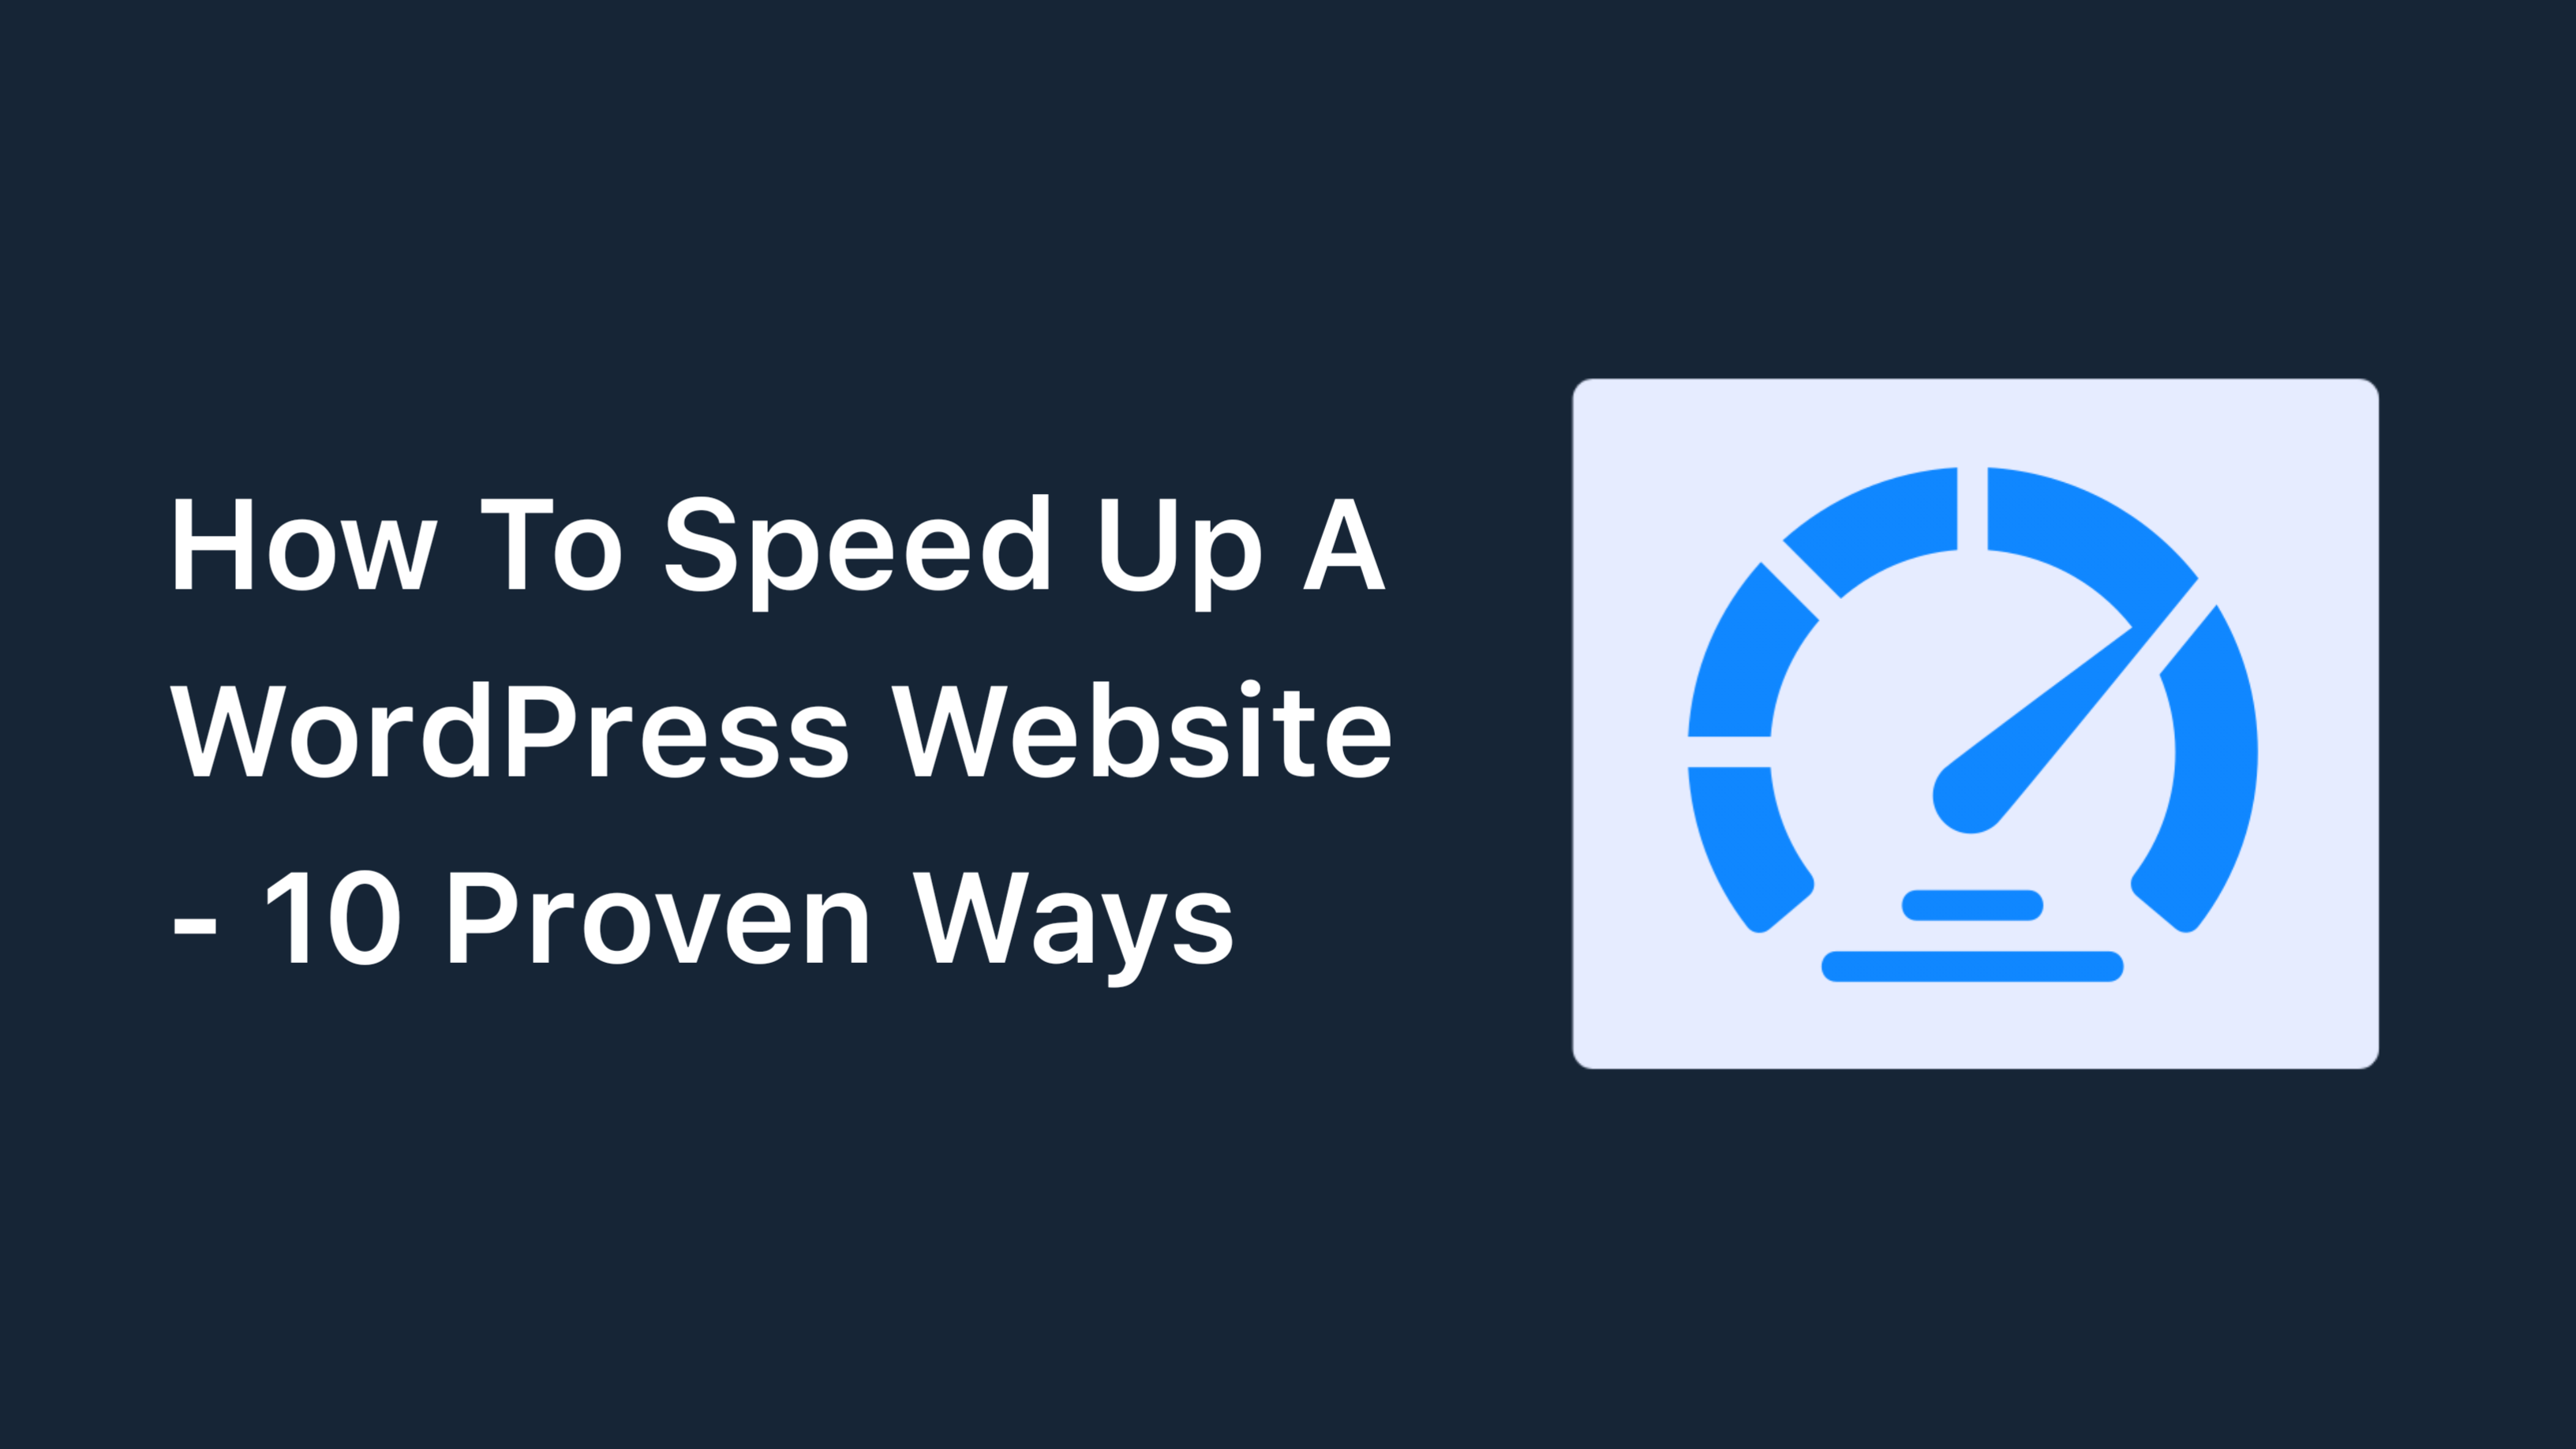 How To Speed Up A WordPress Website - 10 Proven Ways